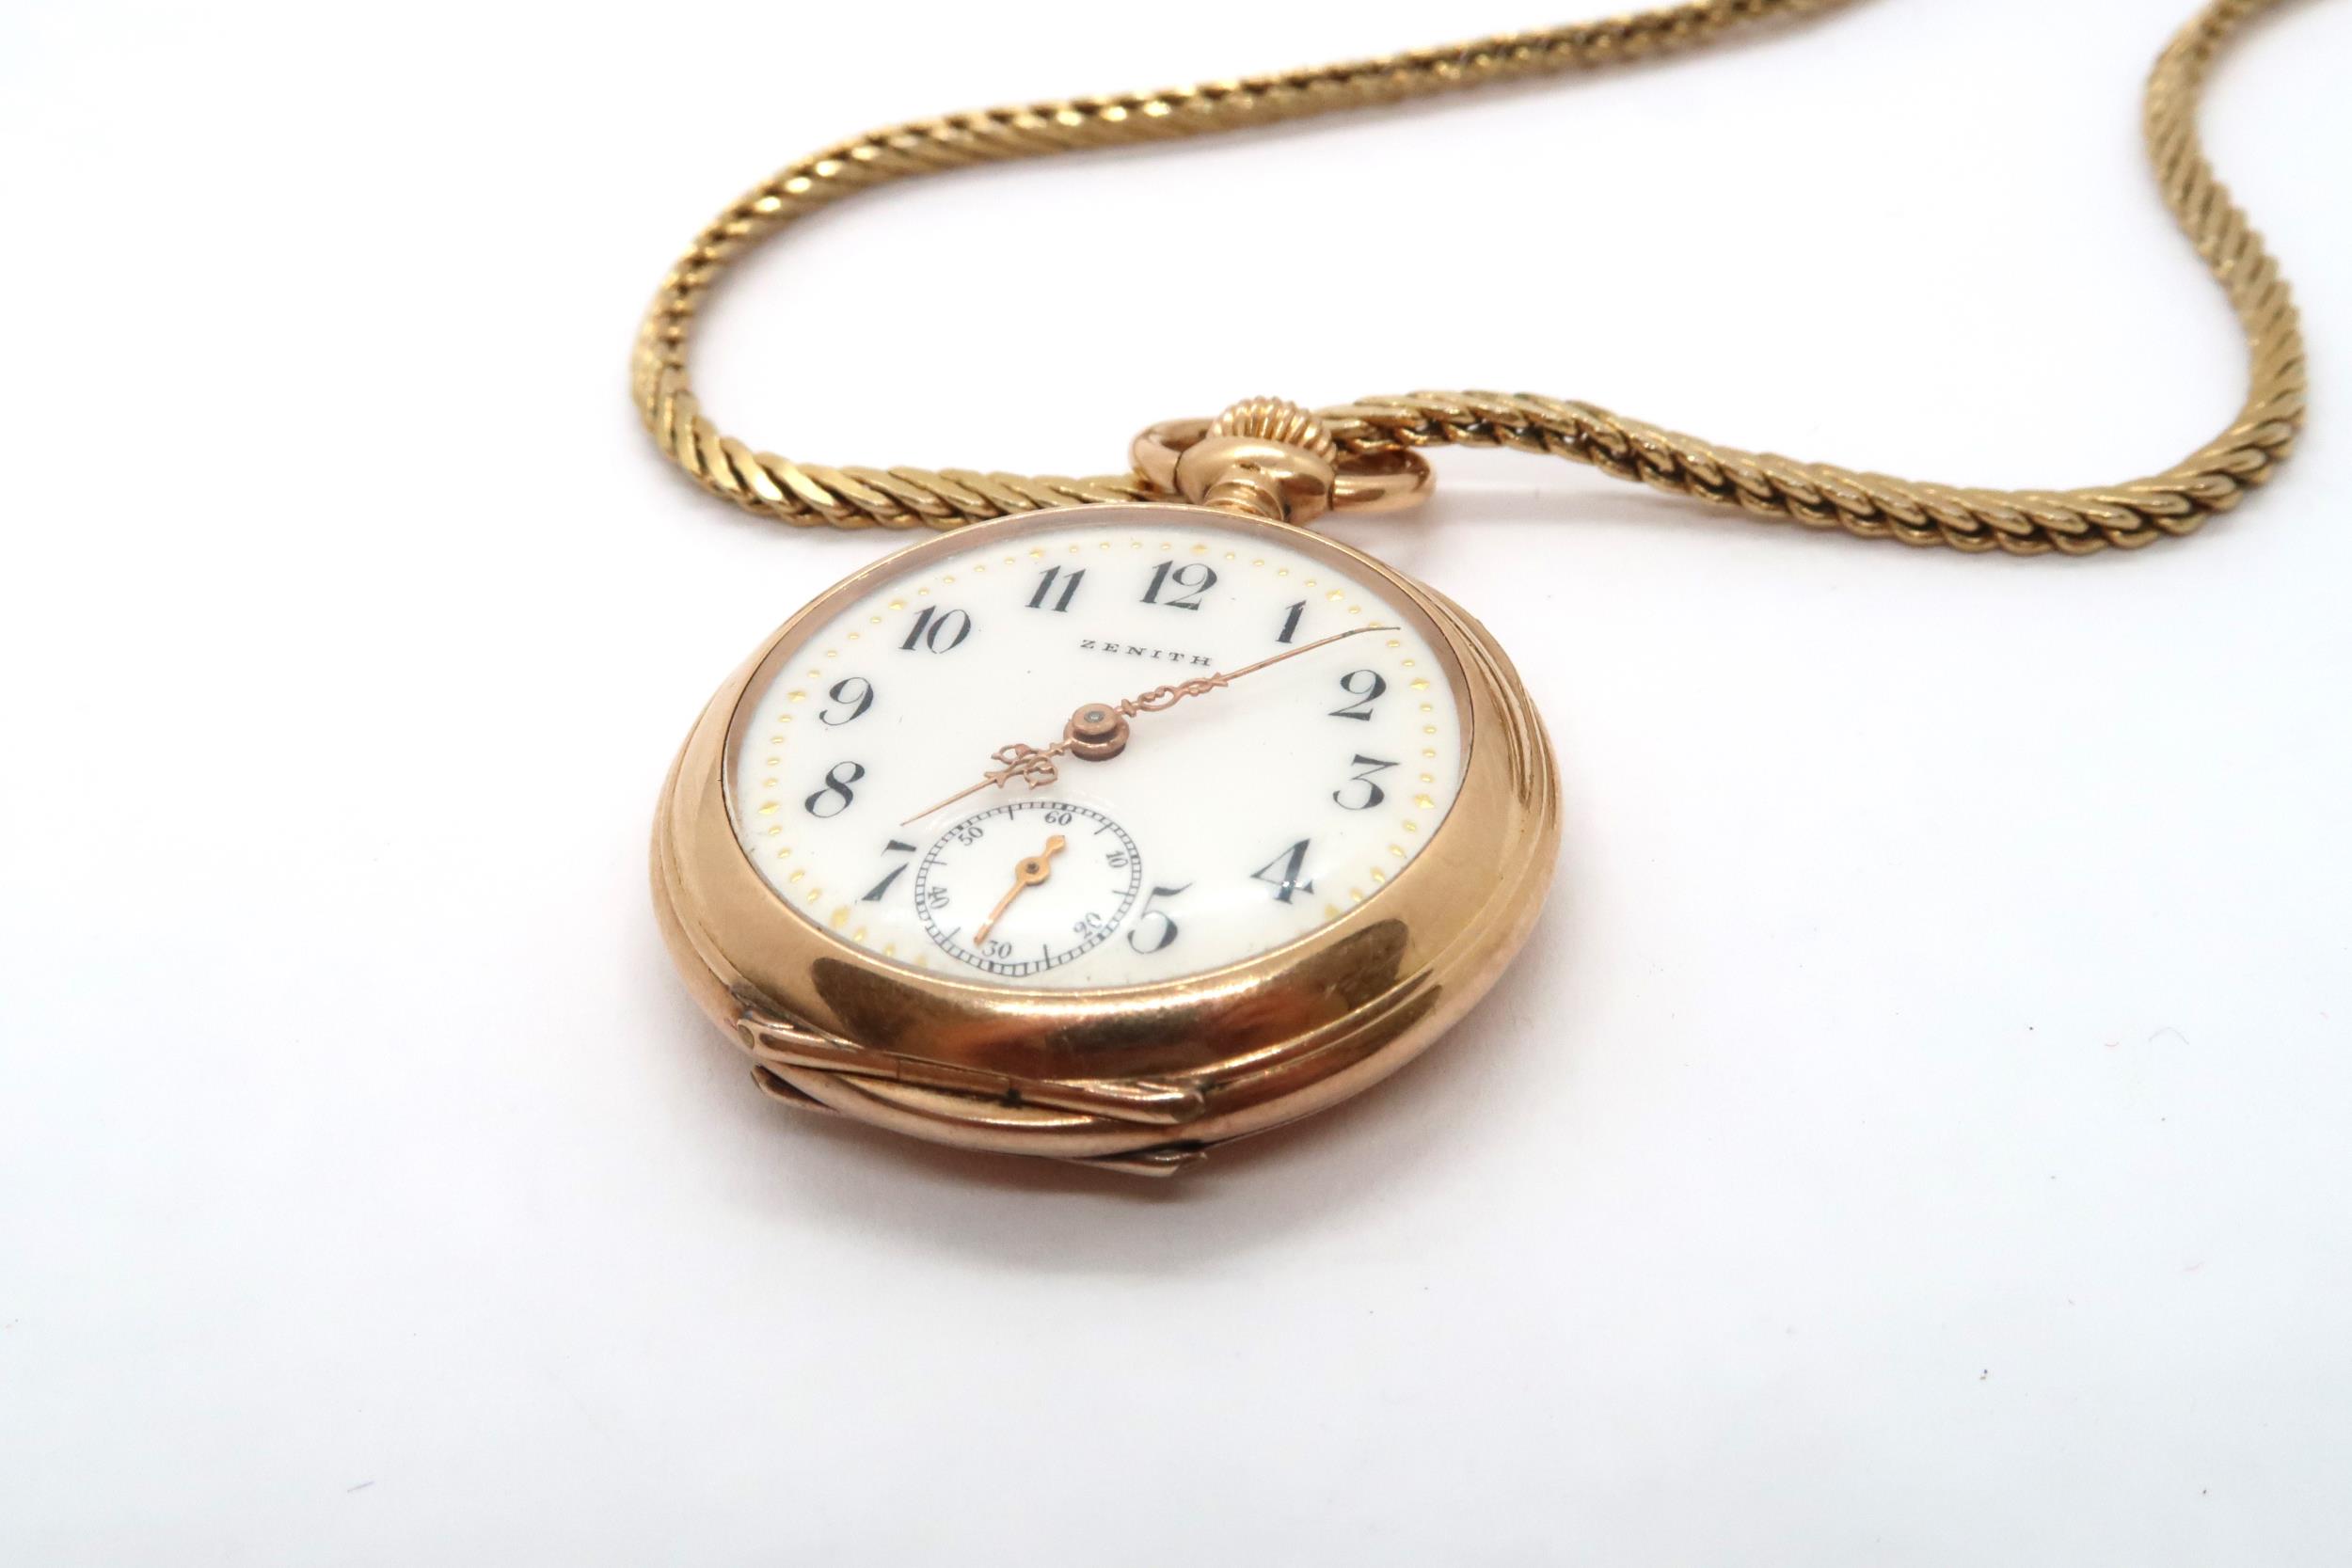 An 18ct yellow gold Zenith pocket watch on yellow metal chain - approx. weight 21.2 grams